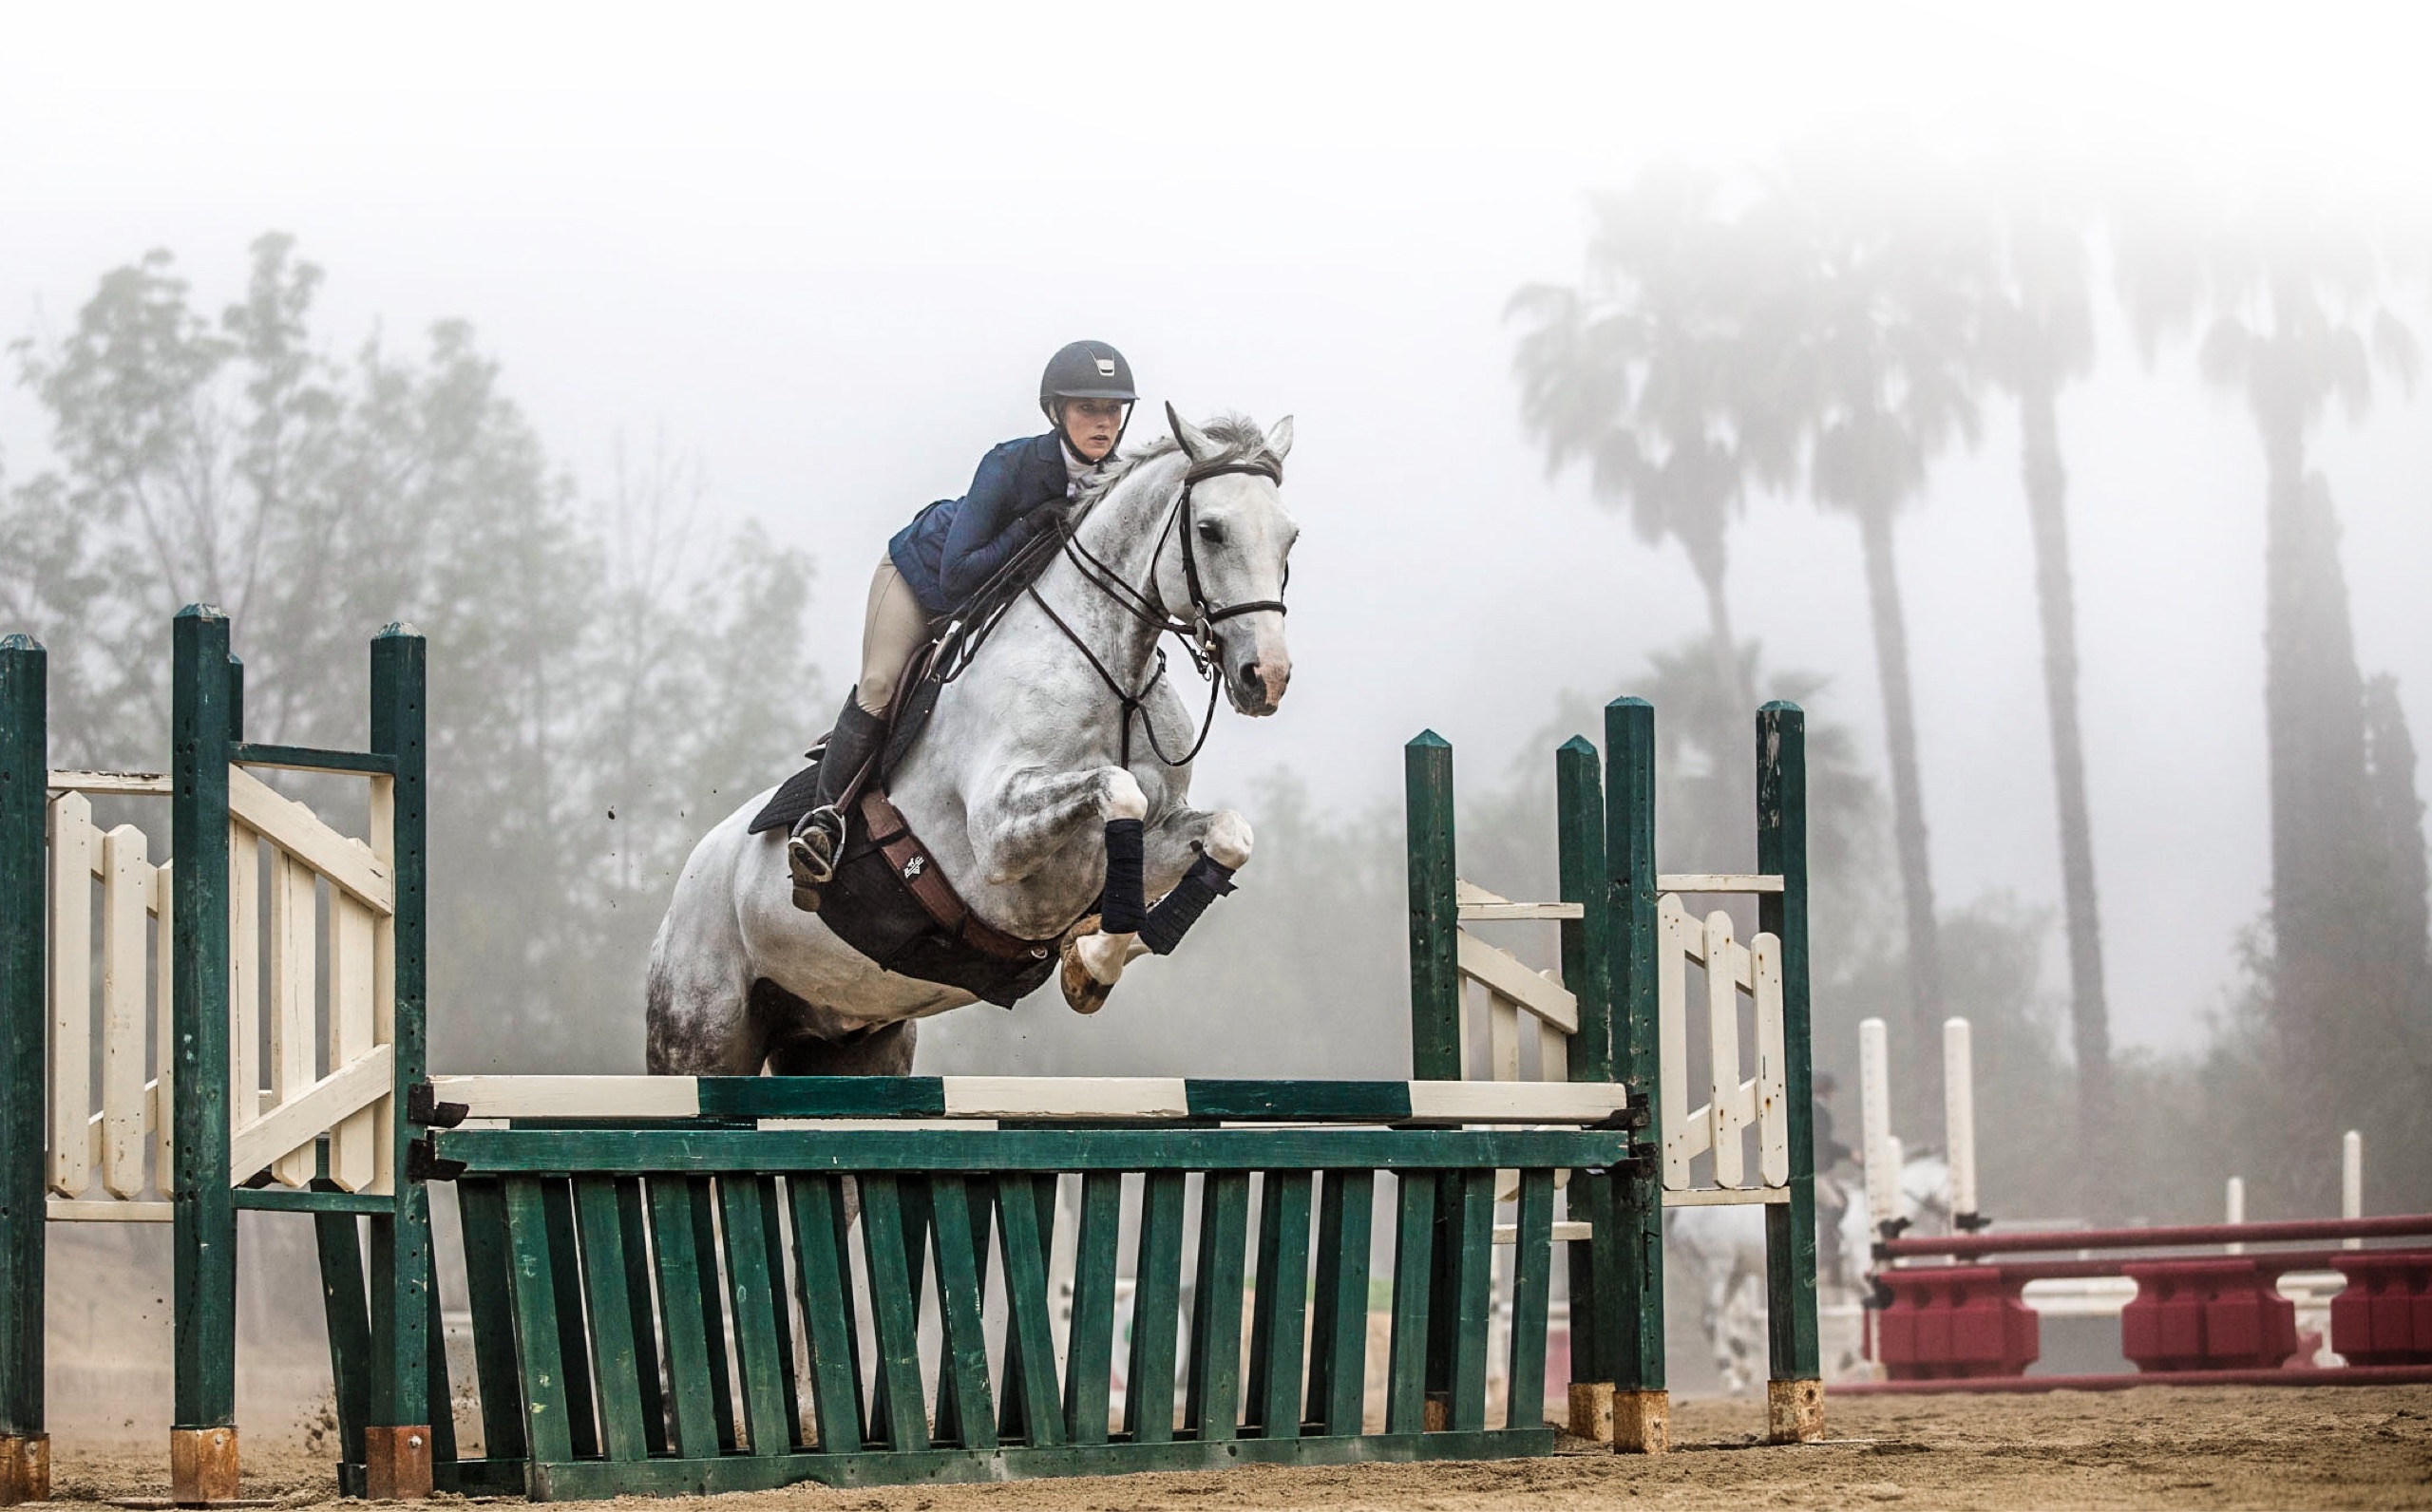 Eventing: Show jumping, Official Olympic sport and a popular outdoor recreational activity. 2560x1600 HD Wallpaper.